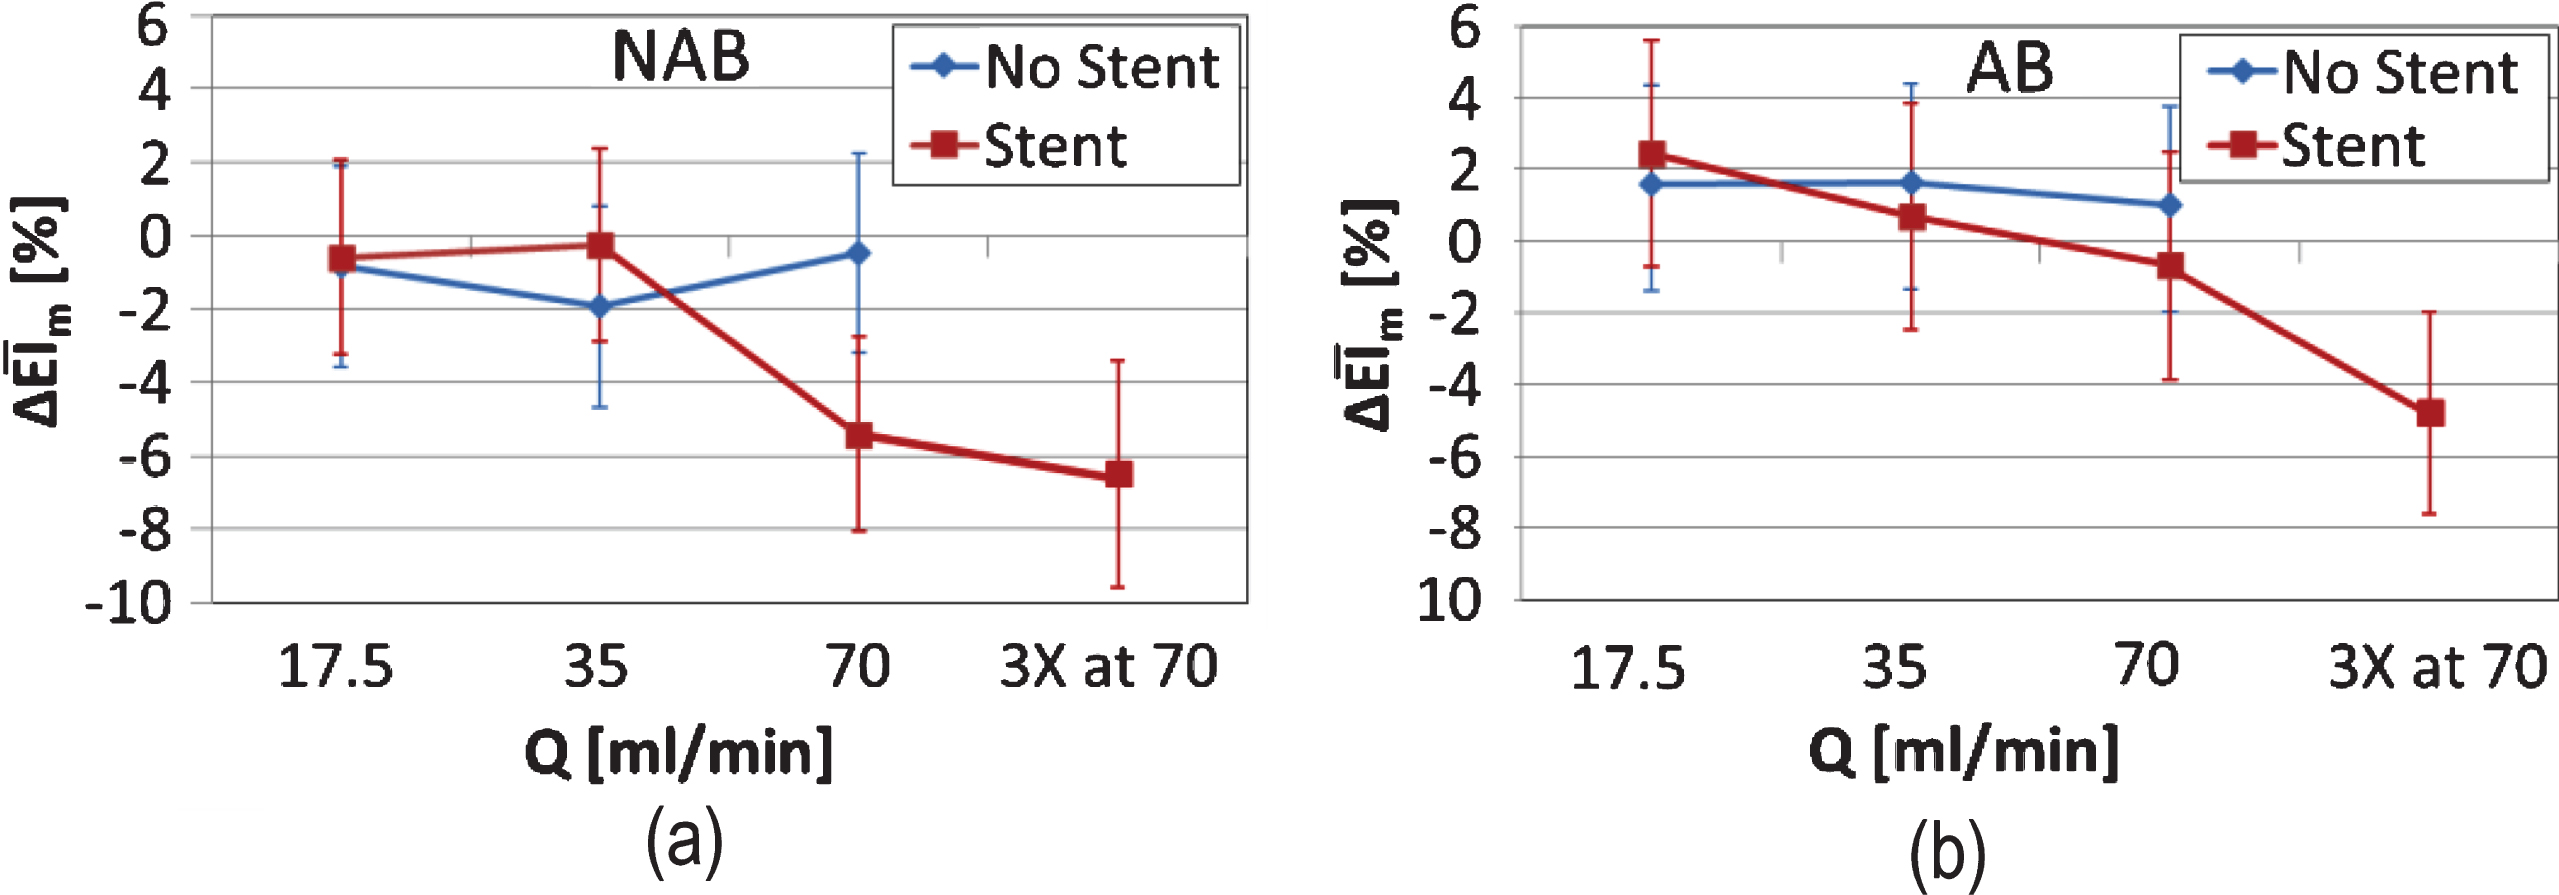 (a) Percentage differences 
ΔEIm¯±STD(n=9)
 for the two flow configurations (stented and non-stented tubes) and for the non-aggregating sample (NAB). 
ΔEI¯m
 is plotted against the flow conditions Q17.5, Q35, Q70 and 3XQ70. (b) 
ΔEI¯m
 against the flow cases for the aggregating sample (AB) and the two flow configurations. 
ΔEI¯m=0
 implies no difference from the baseline condition.